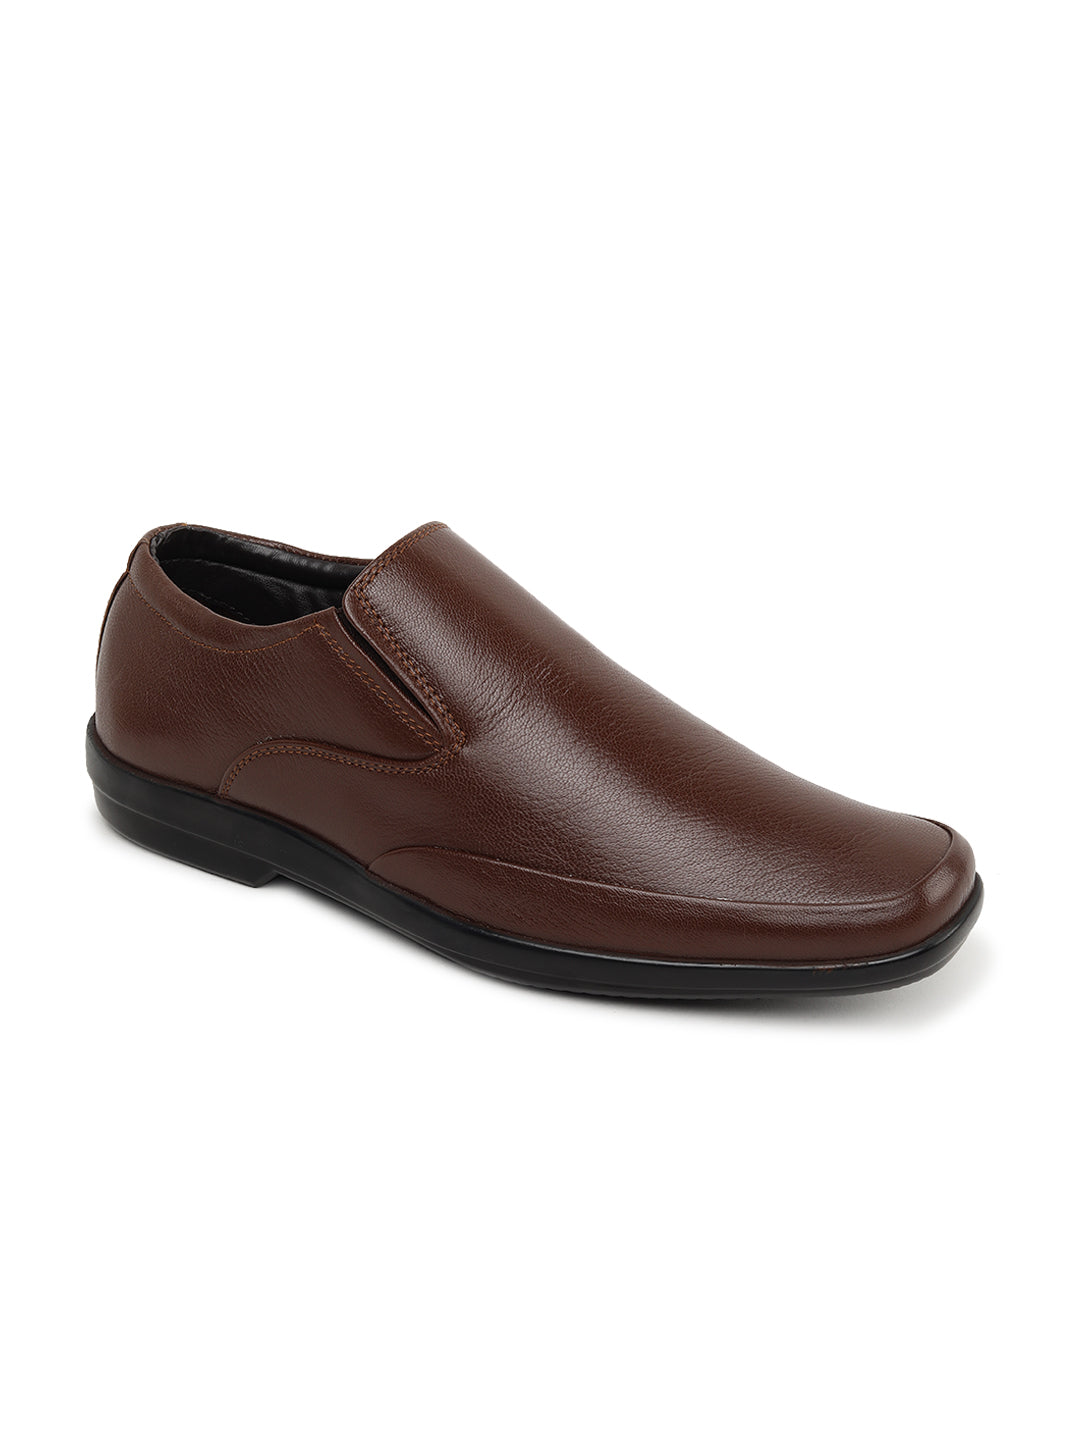 Paragon R11229G Men Formal Shoes | Corporate Office Shoes | Smart &amp; Sleek Design | Comfortable Sole with Cushioning | Daily &amp; Occasion Wear